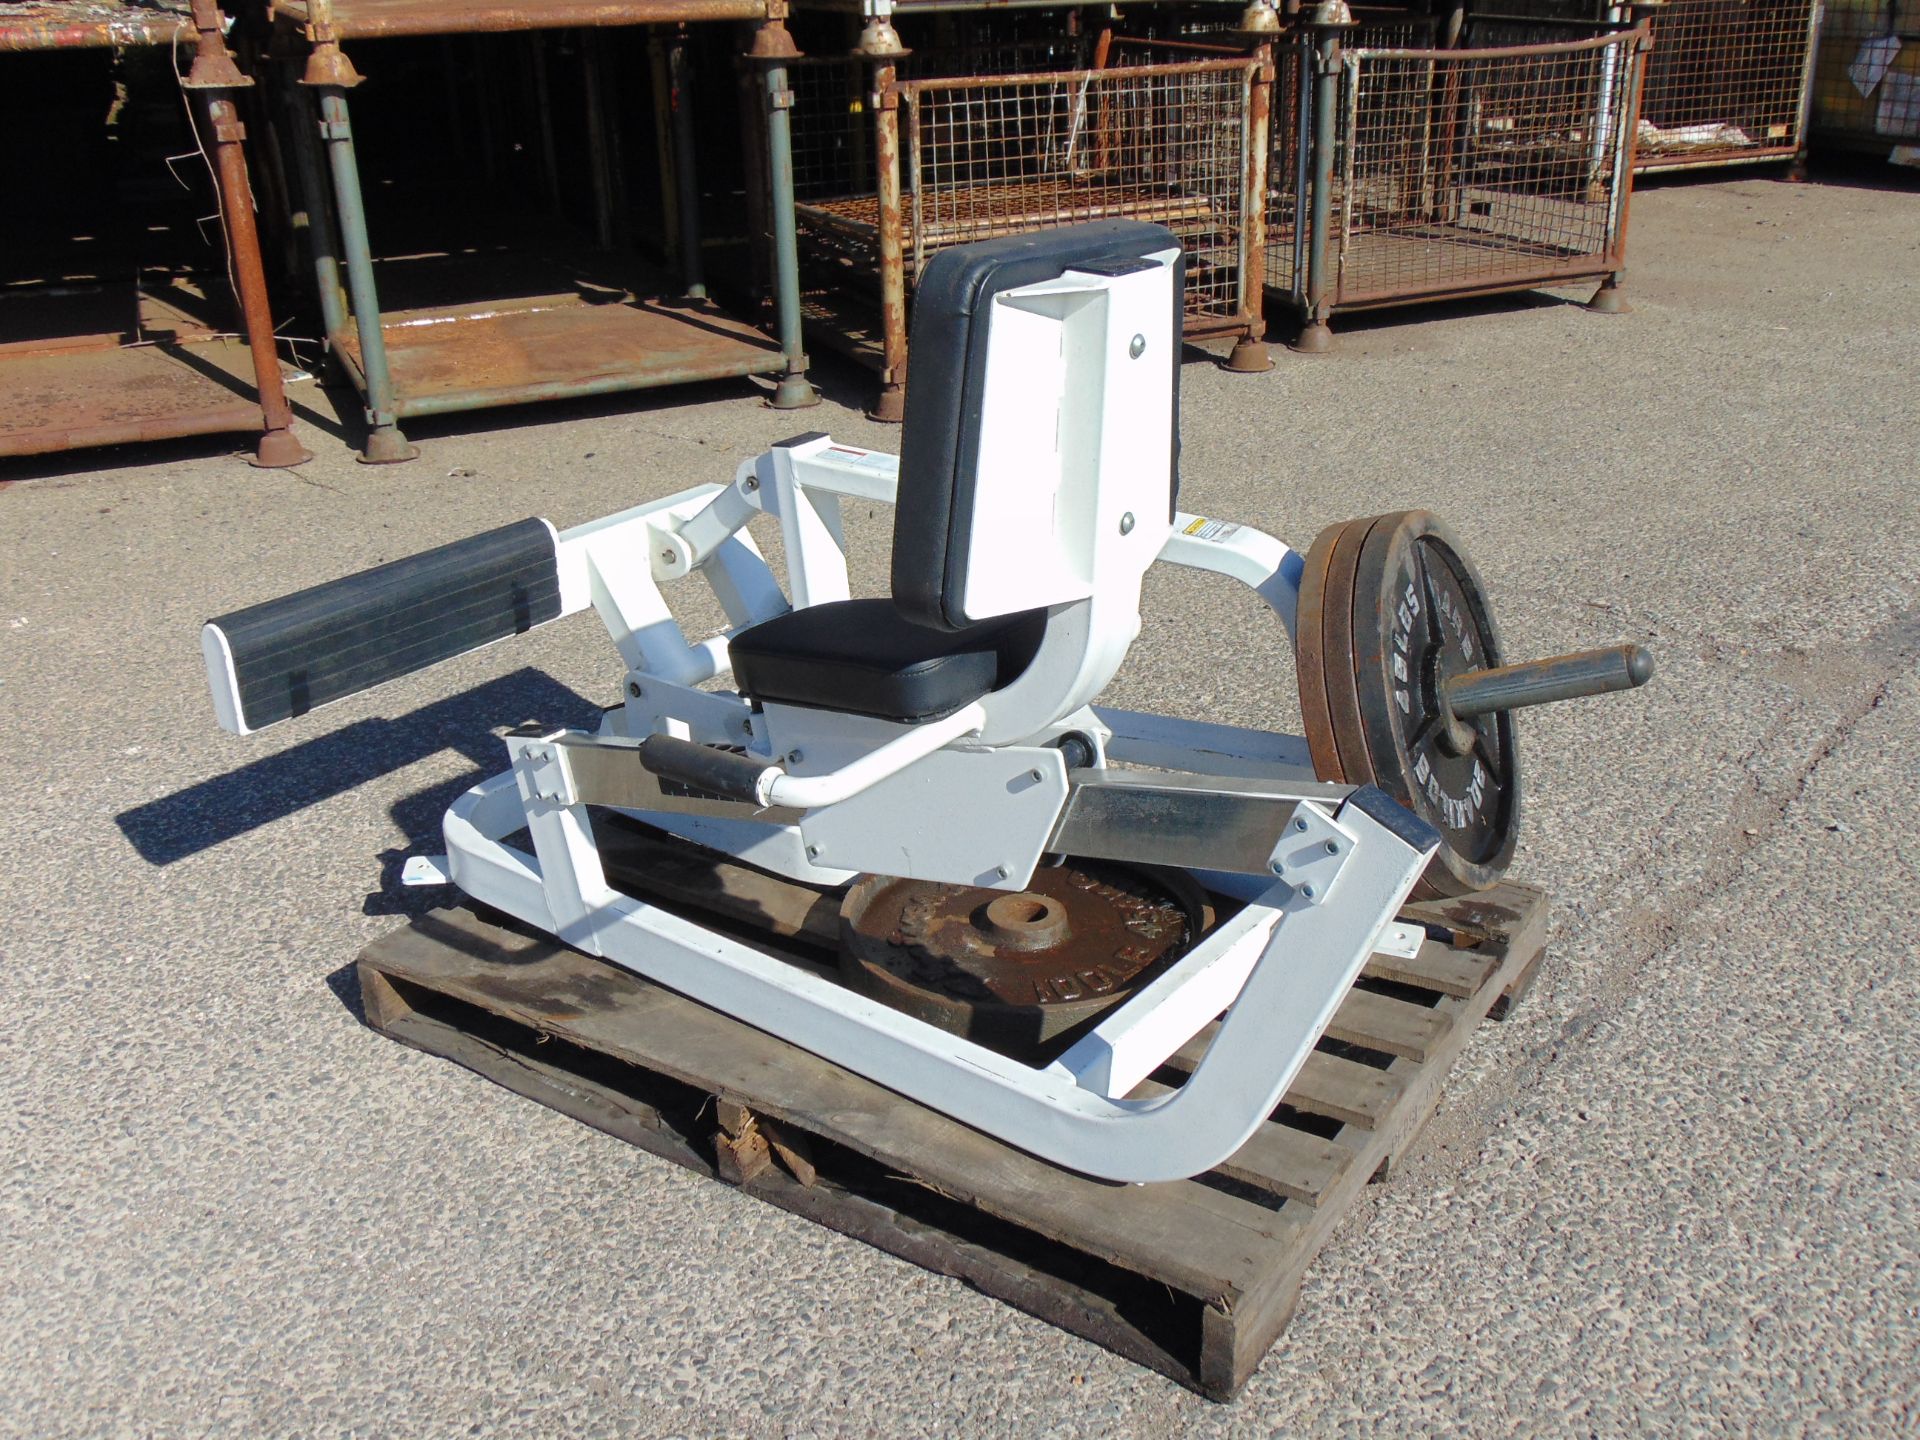 Cybex 5245 Plate Loaded Rotary Calf Exercise Machine - Image 2 of 10